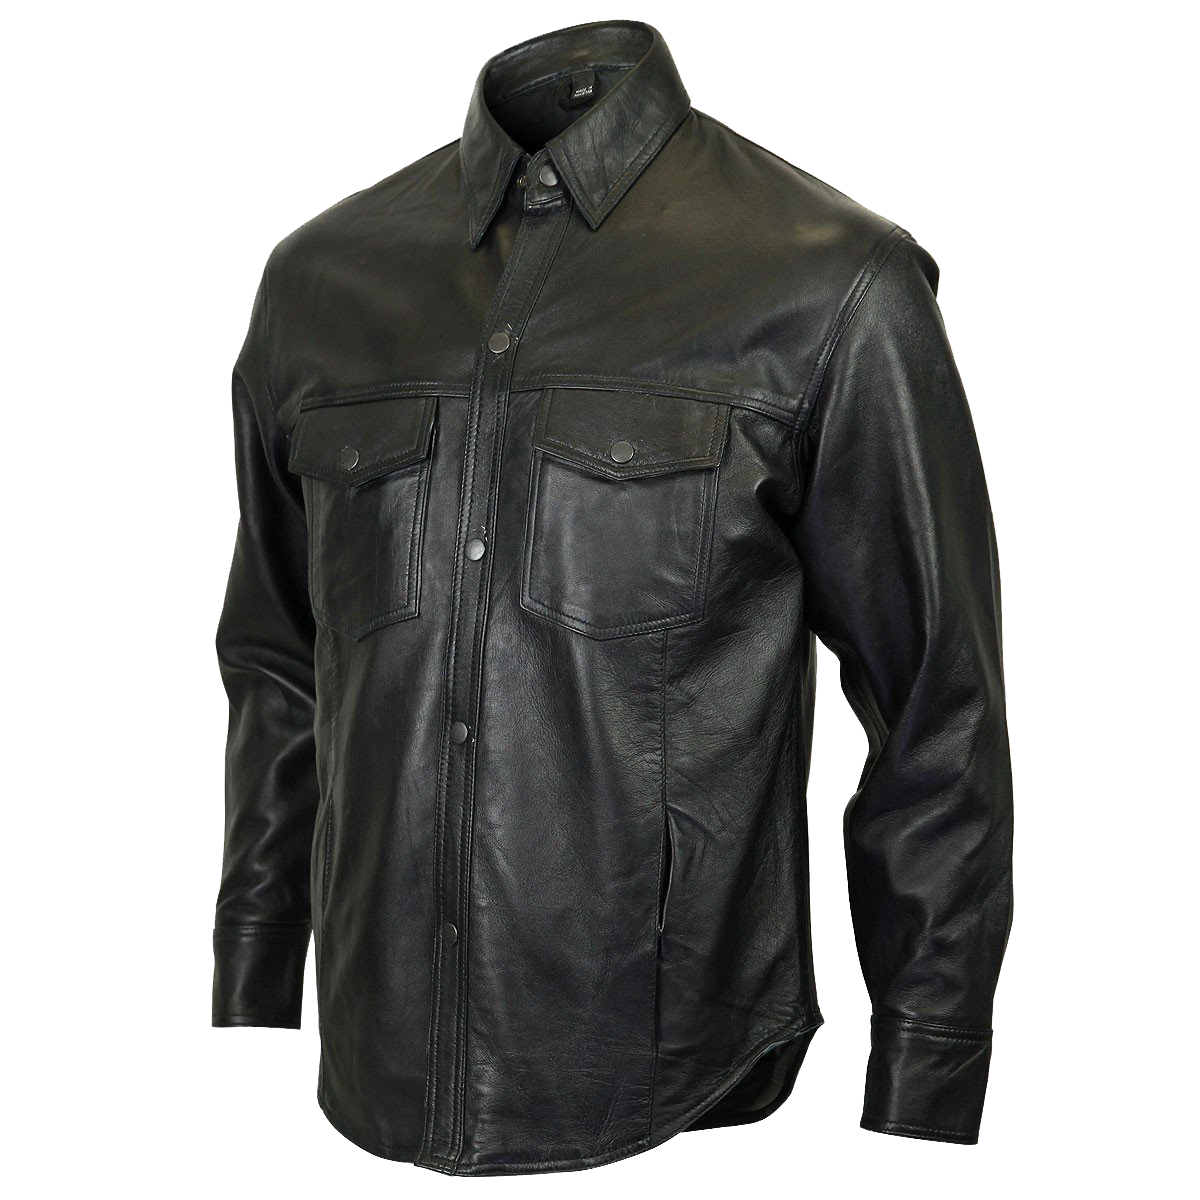 VL504 Vance Leather Men's Leather Shirt with Snap Down Collar